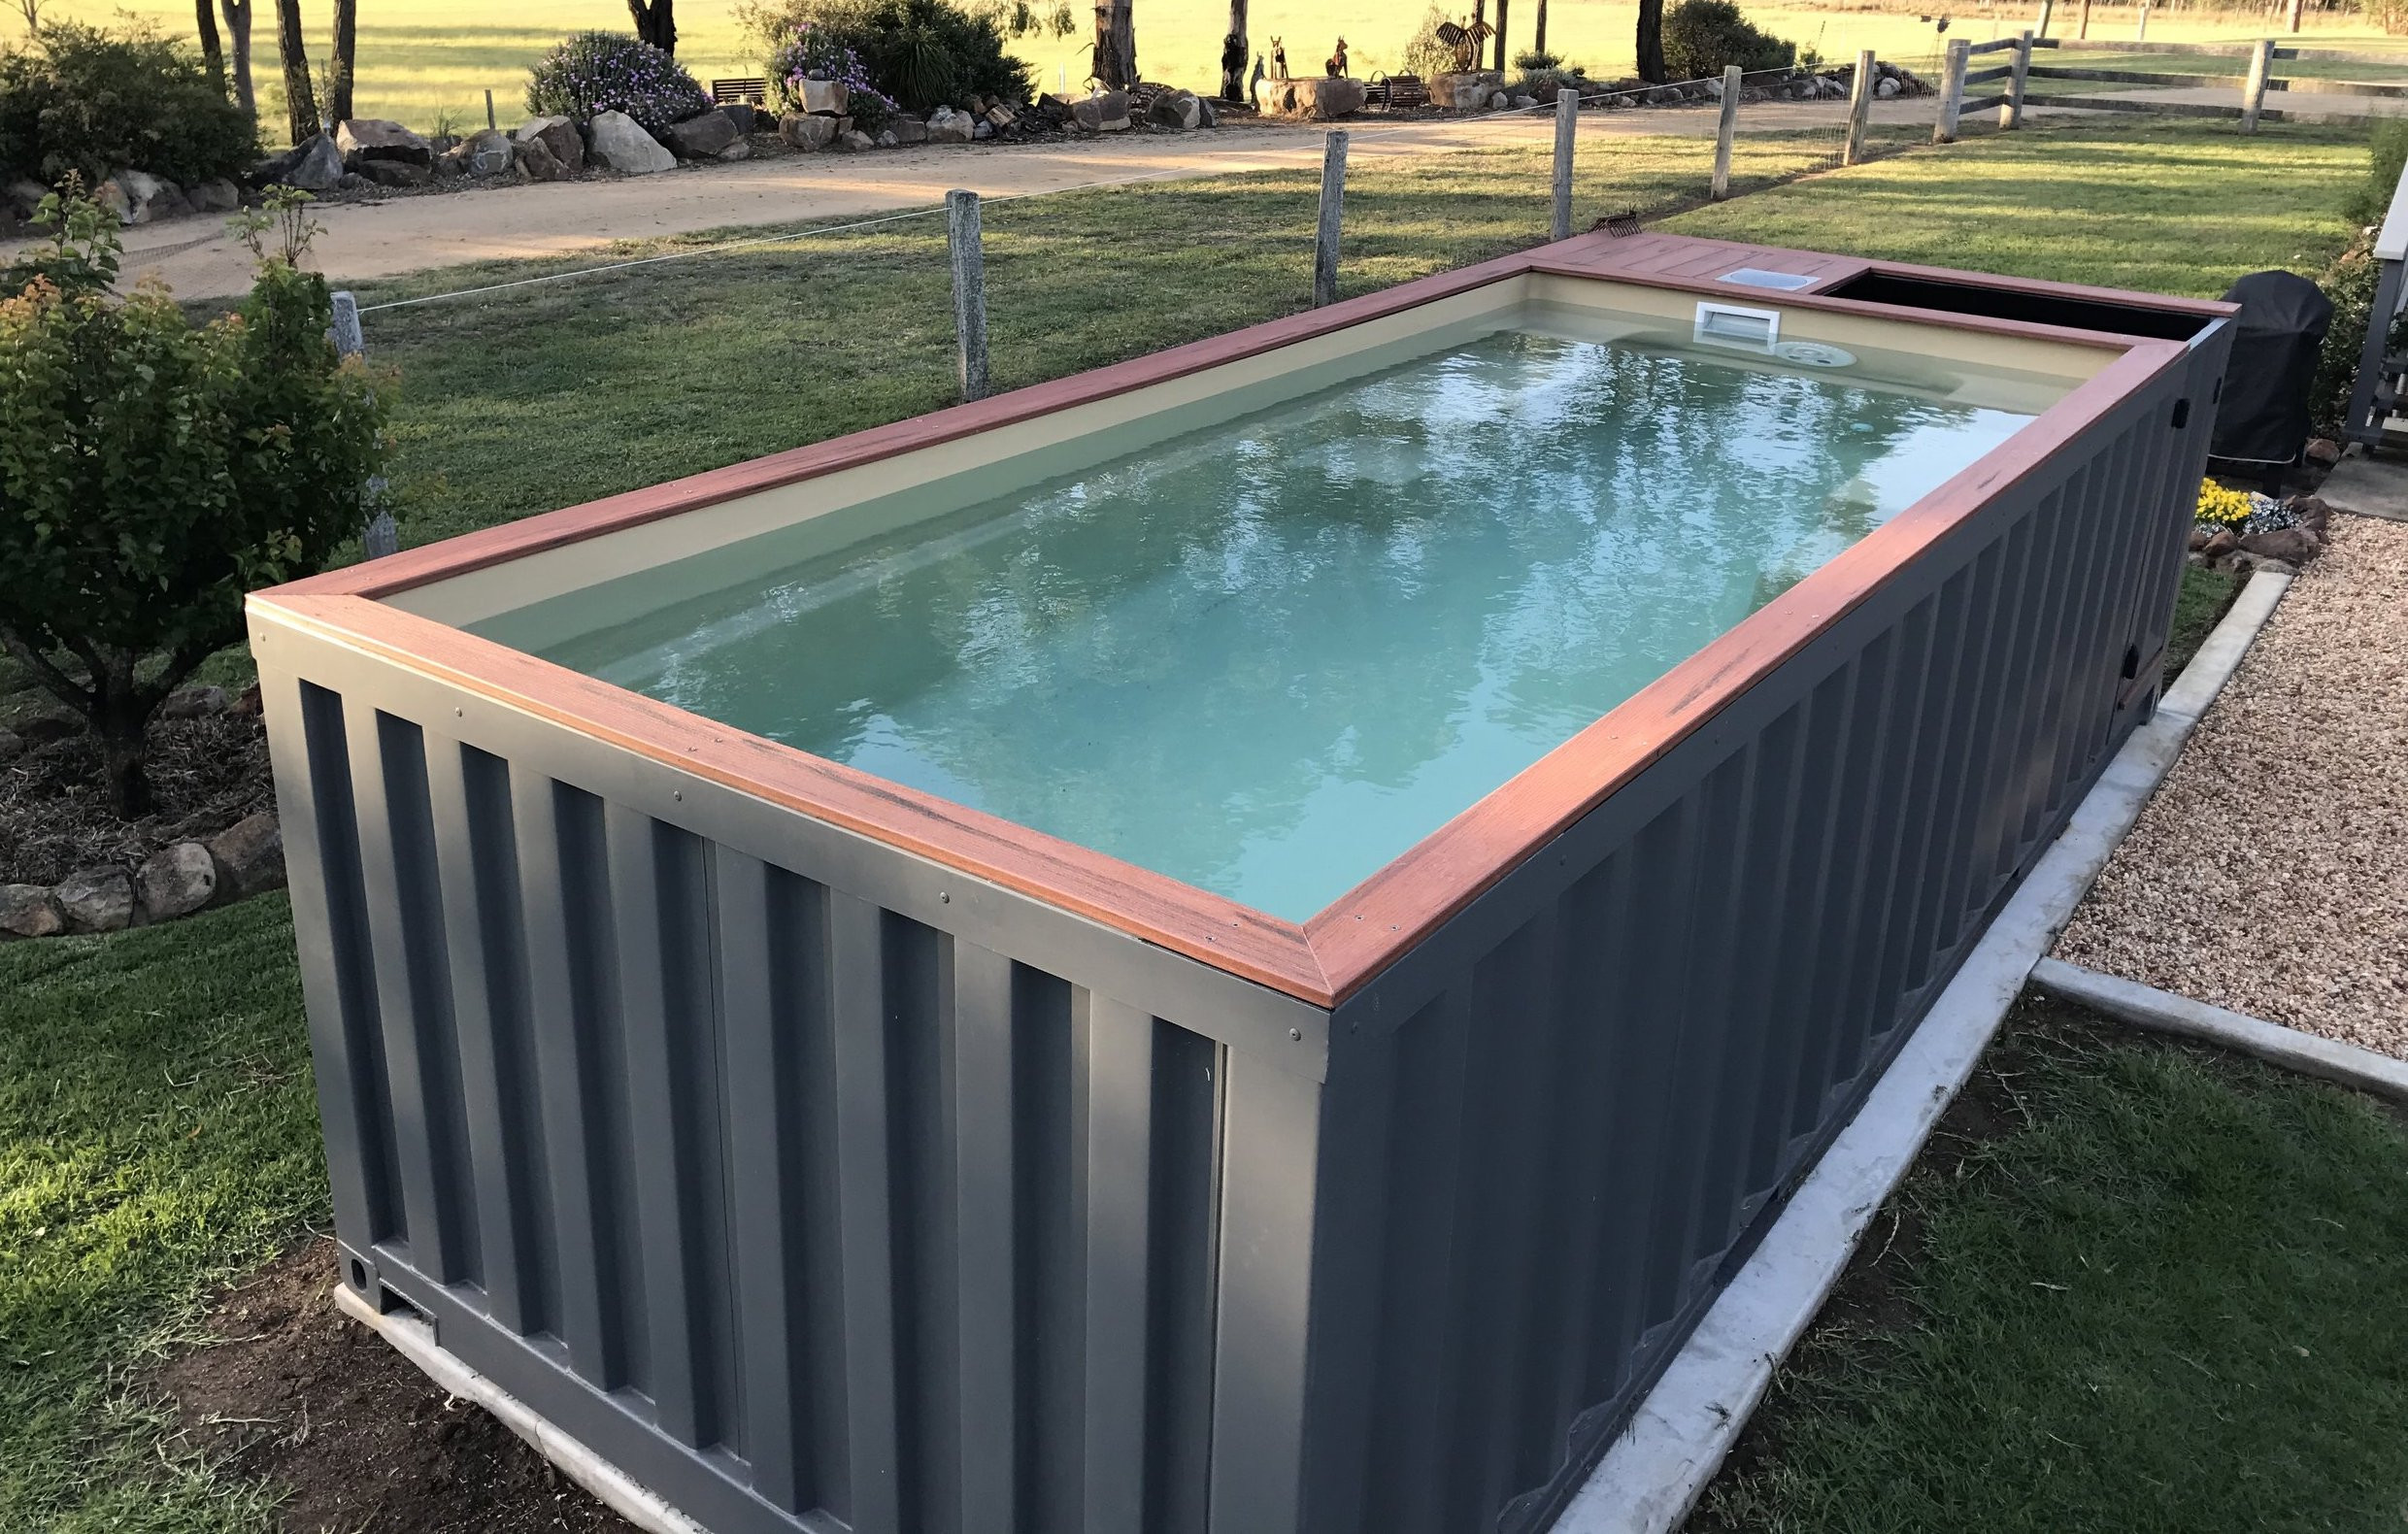 Pool Diy
 The DIY Shipping Container Swimming Pool Buy a Shipping